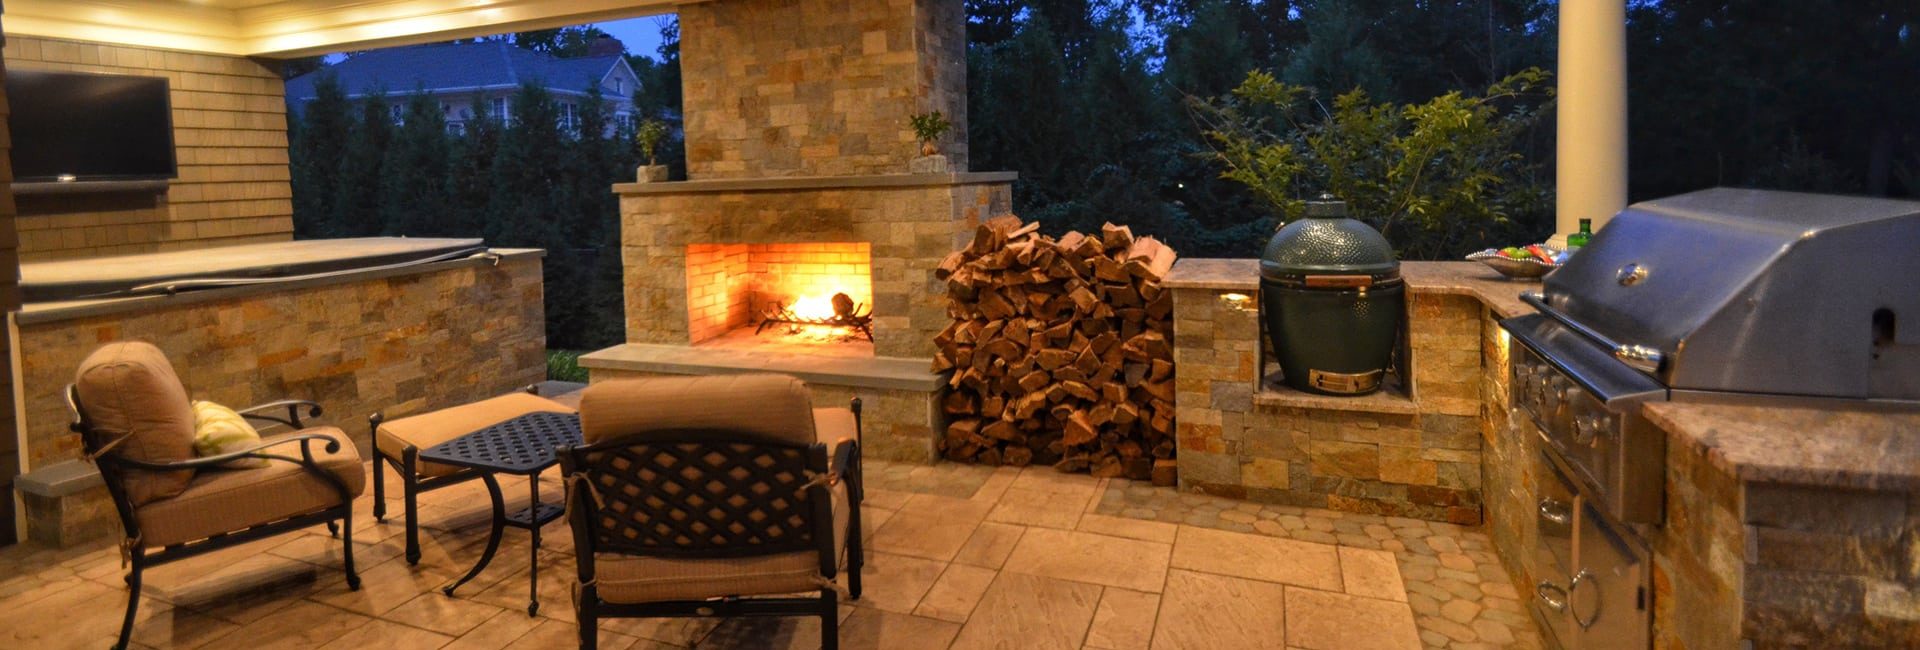 OUTDOOR LIVING SPACES